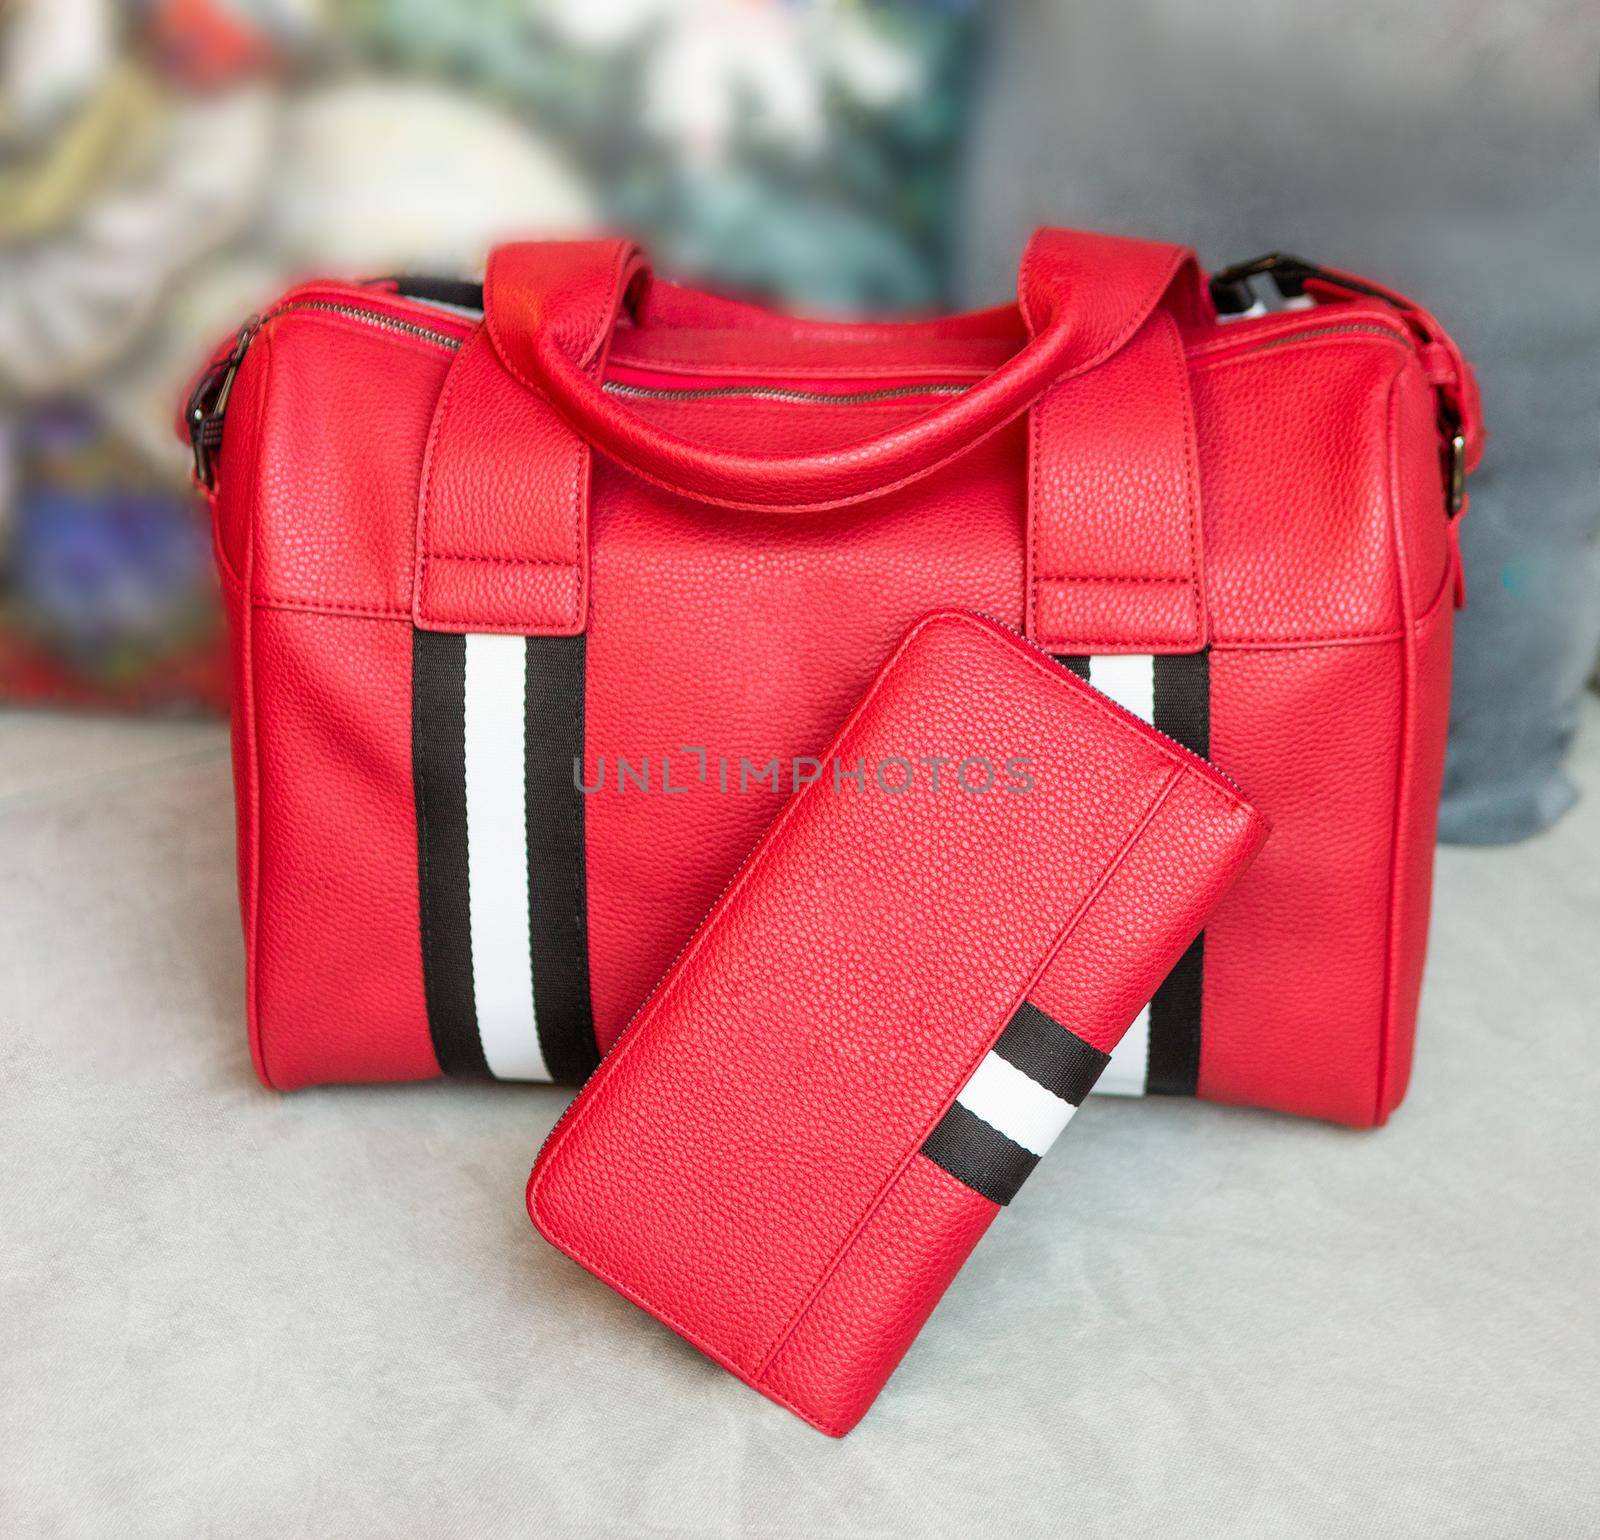 Red man handbag and wallet isolated by ferhad